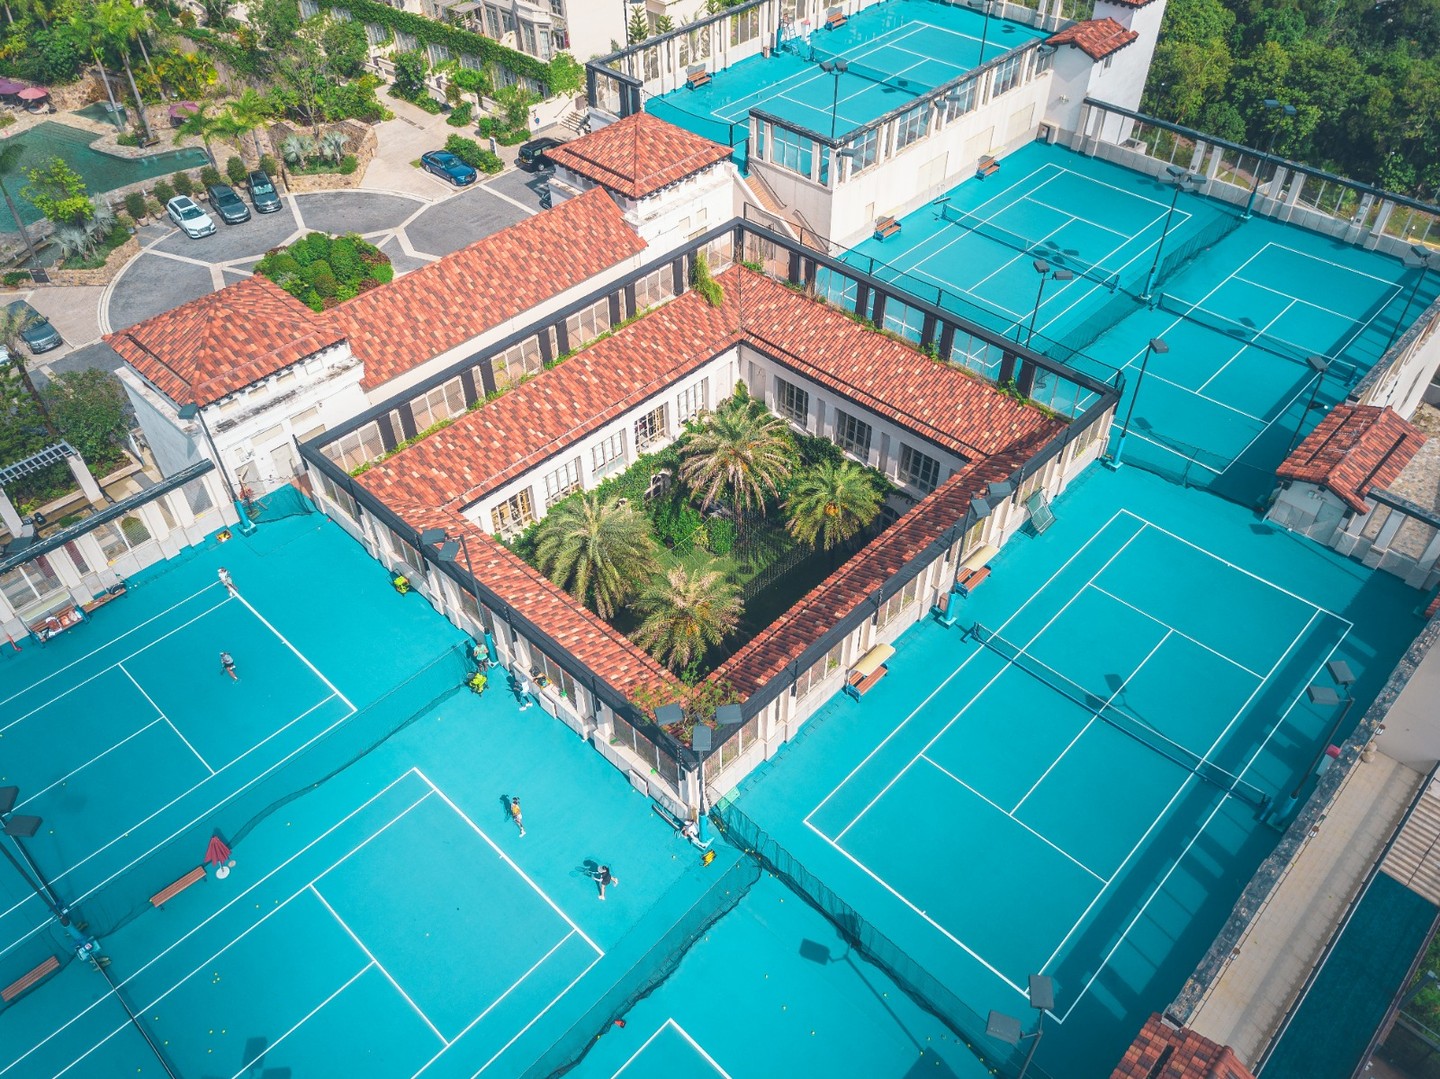 RAFA NADAL ACADEMY TO COURT HK TALENT 拿度網球學校落戶香港 培養網壇精英  Good news for tennis players and fans! Spanish ace Rafa Nadal has chosen Hong Kong as the venue for his first eponymous tennis centre in Asia! Set to open in the picturesque Sai Kung district in July, it will bring in coaches from the Rafa Nadal Academy's campus in Mallorca. The latter has proven to be a breeding ground, boasting international top seed players such as local star Coleman Wong, the reigning junior doubles champion for both the US Open and Australian Open!  網球愛好者佳音！西班牙拿度網球學校 (Rafa Nadal Academy) 將在香港設立亞洲首間分校。學校將派出教練團隊來港，並為學員度身訂造訓練計劃，提供高強度及高質素訓練。剛奪得今屆美網及澳網青少年男雙冠軍的港將黃澤林，亦正在拿度網球學校受訓。  International standard facilities at the Hong Kong Golf & Tennis Academy in Sai Kung. Photo: Hong Kong Golf & Tennis Academy  位於西貢，設有世界級設備的香港高爾夫球及網球學院（HKGTA）。圖片：香港高爾夫球及網球學院  @rafanadalacademy @rafaelnadal  #hongkong #asiasworldcity #brandhongkong #RafaNadal #dynamichk #ColemanWong #Tennis #RafaNadalTennisCentre #RafaNadalAcademy #HKGTA #香港 #香港品牌 #亞洲國際都會 #活力澎湃 #拿度 #黃澤林 #拿度網球學校 #網球 #HKGTA #香港高爾夫球及網球學校